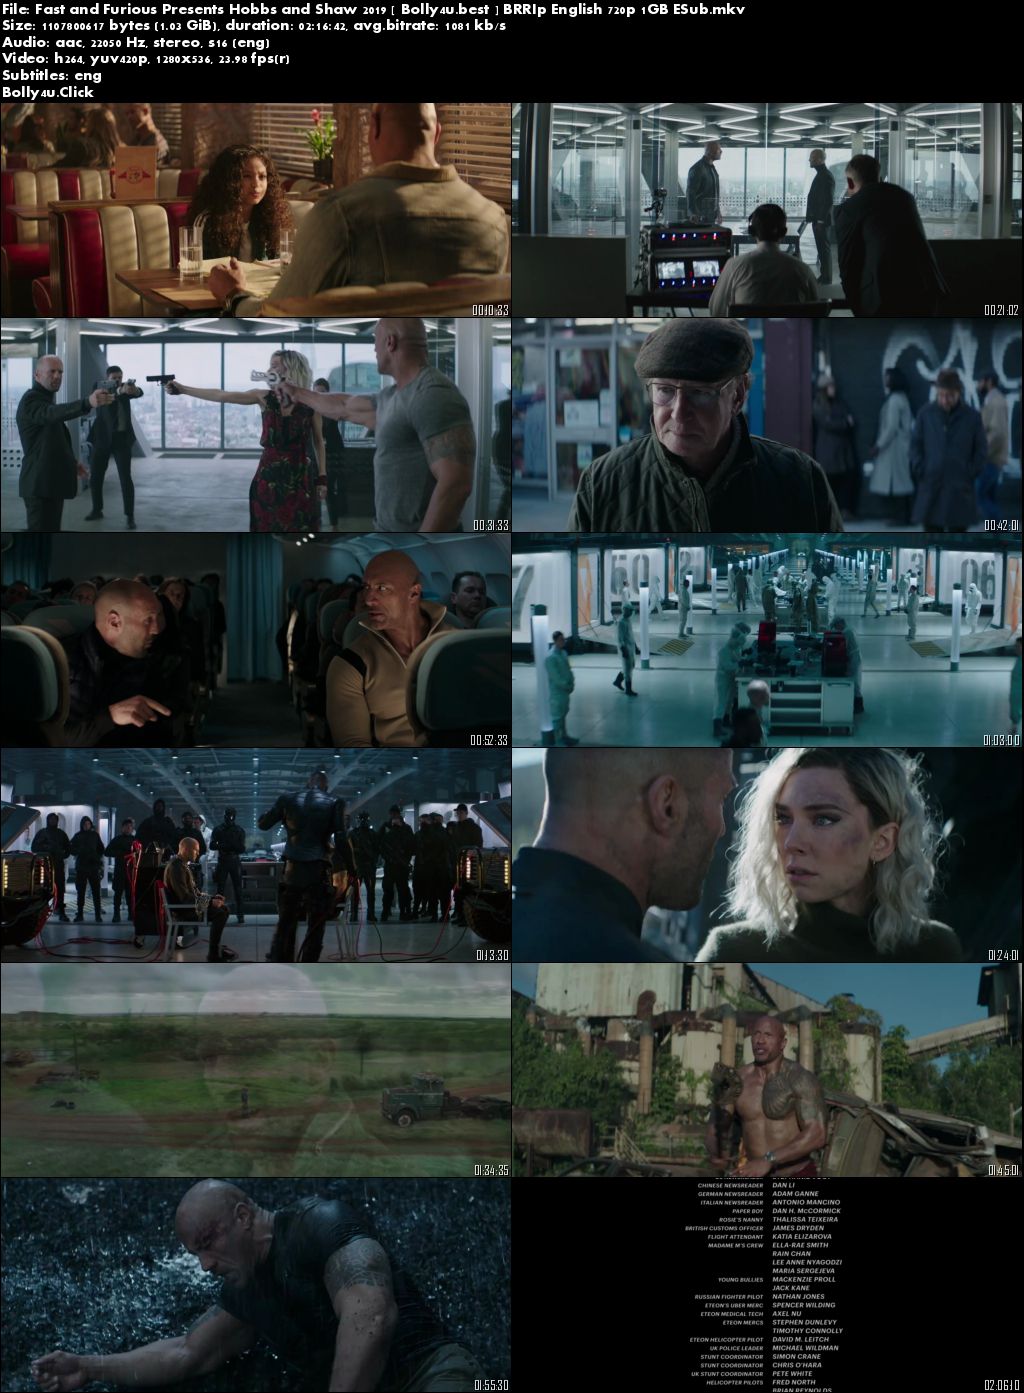 Fast and Furious Presents Hobbs and Shaw 2019 BRRip 1GB English 720p ESub Download